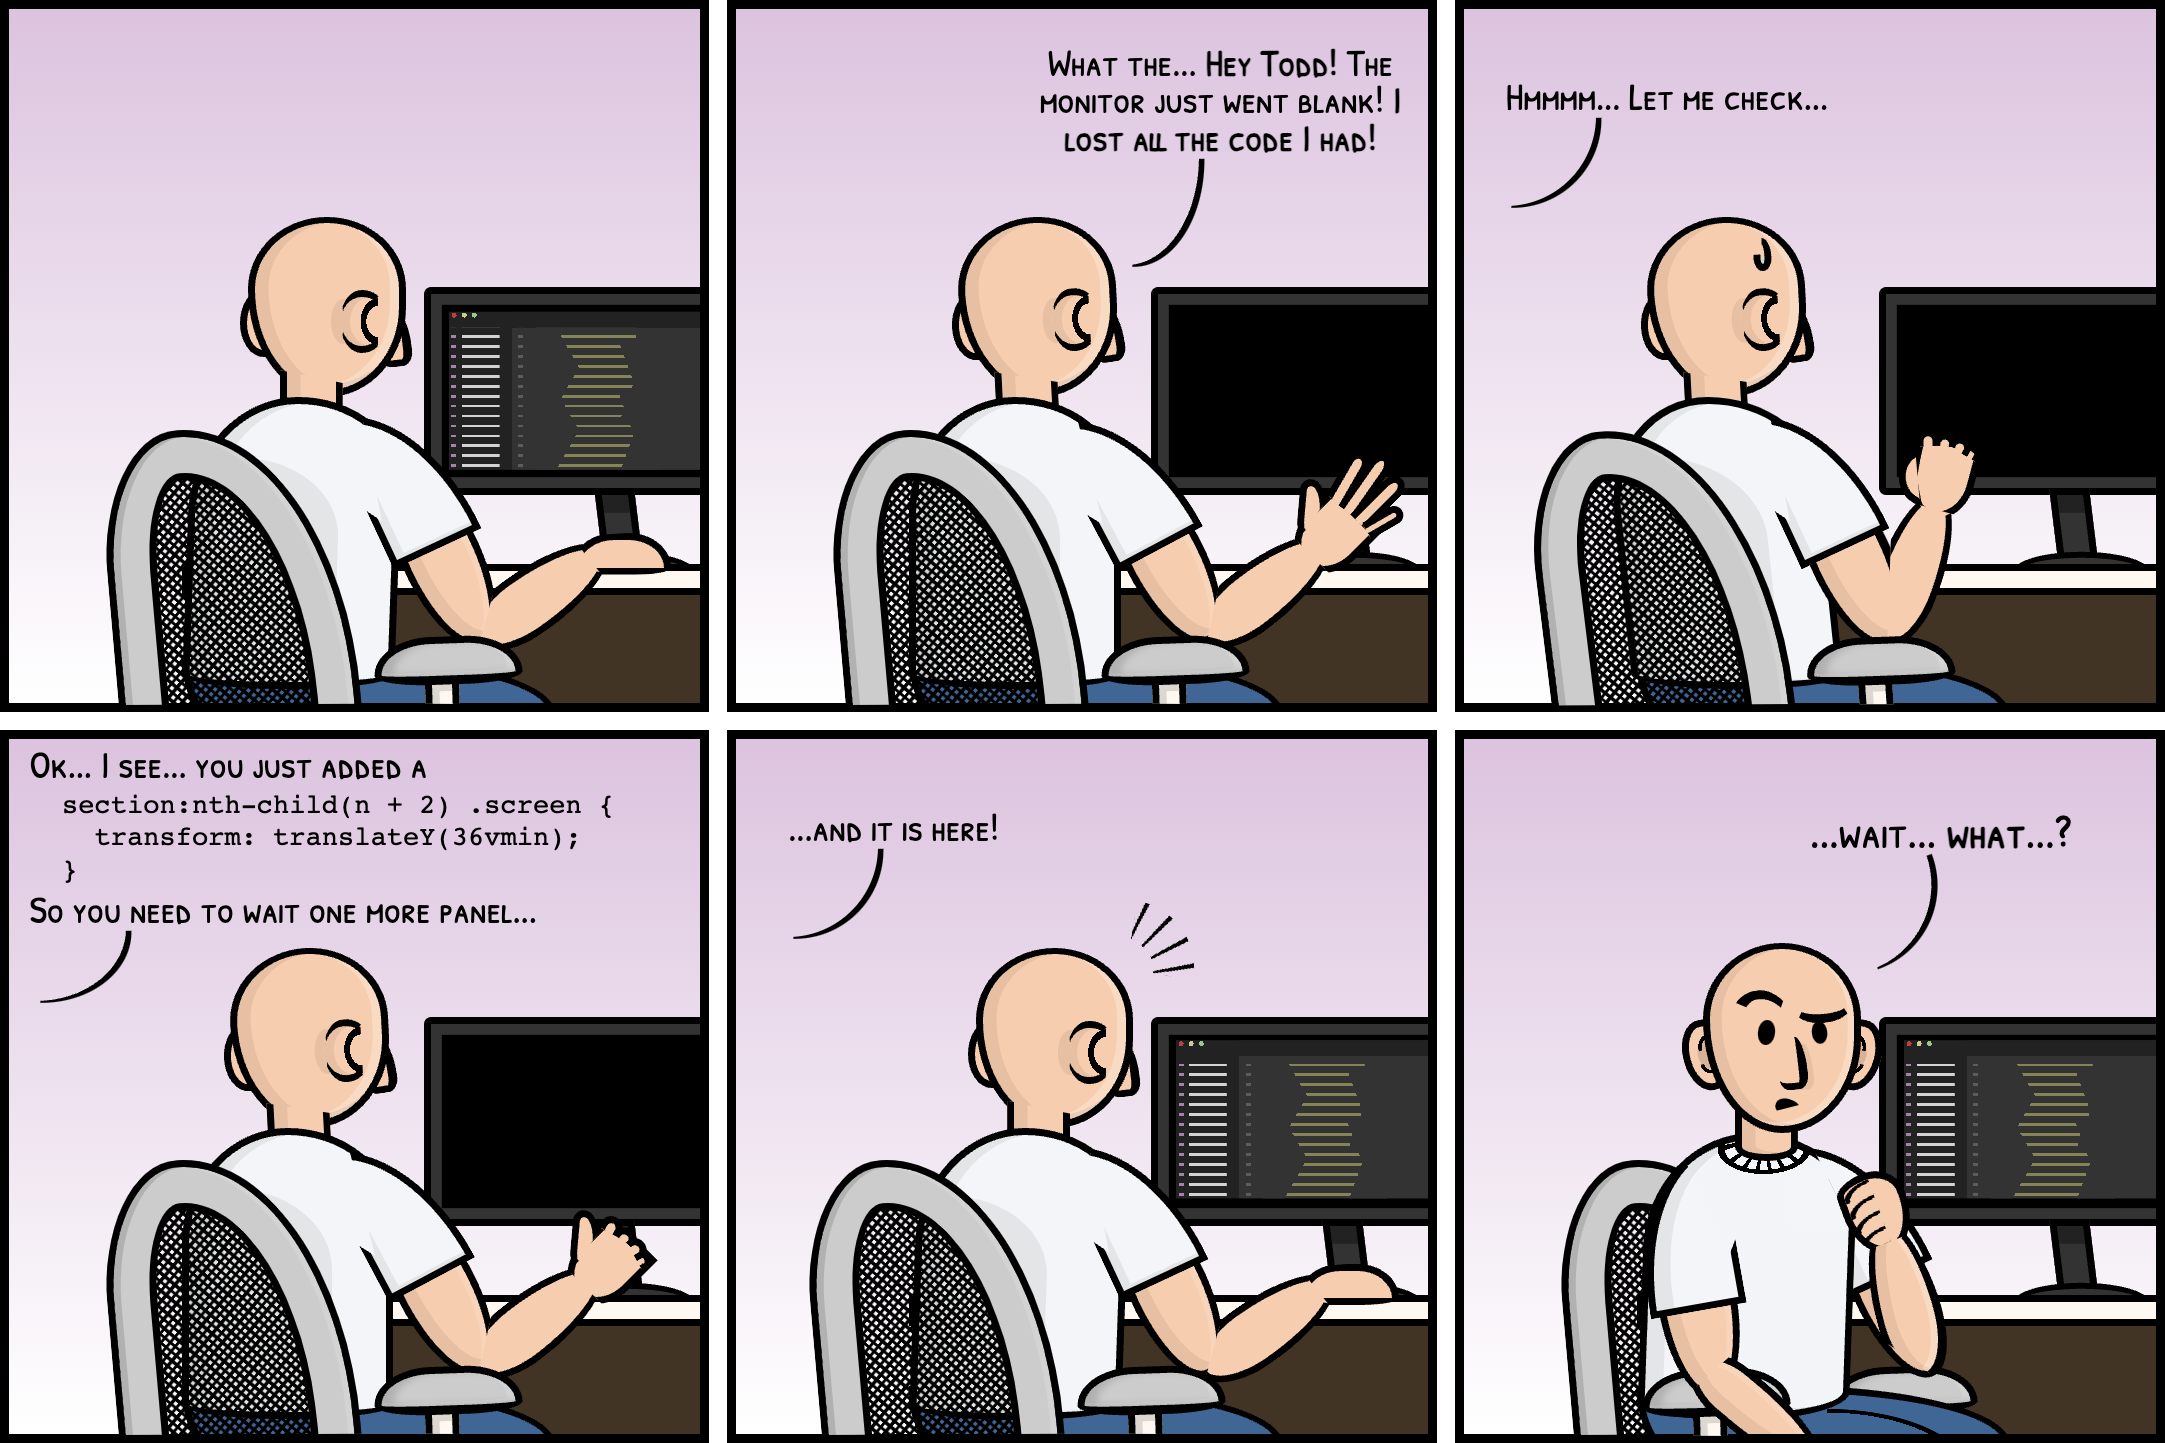 Comic with 6 panels showing a man sitting in front of a computer. The screen goes off and the person asks for help. Another person off-panel says the problem is a translateY and to wait one more panel. In the next panel (below to the one where the screen disappeared), the code appears to the confusion of the person.